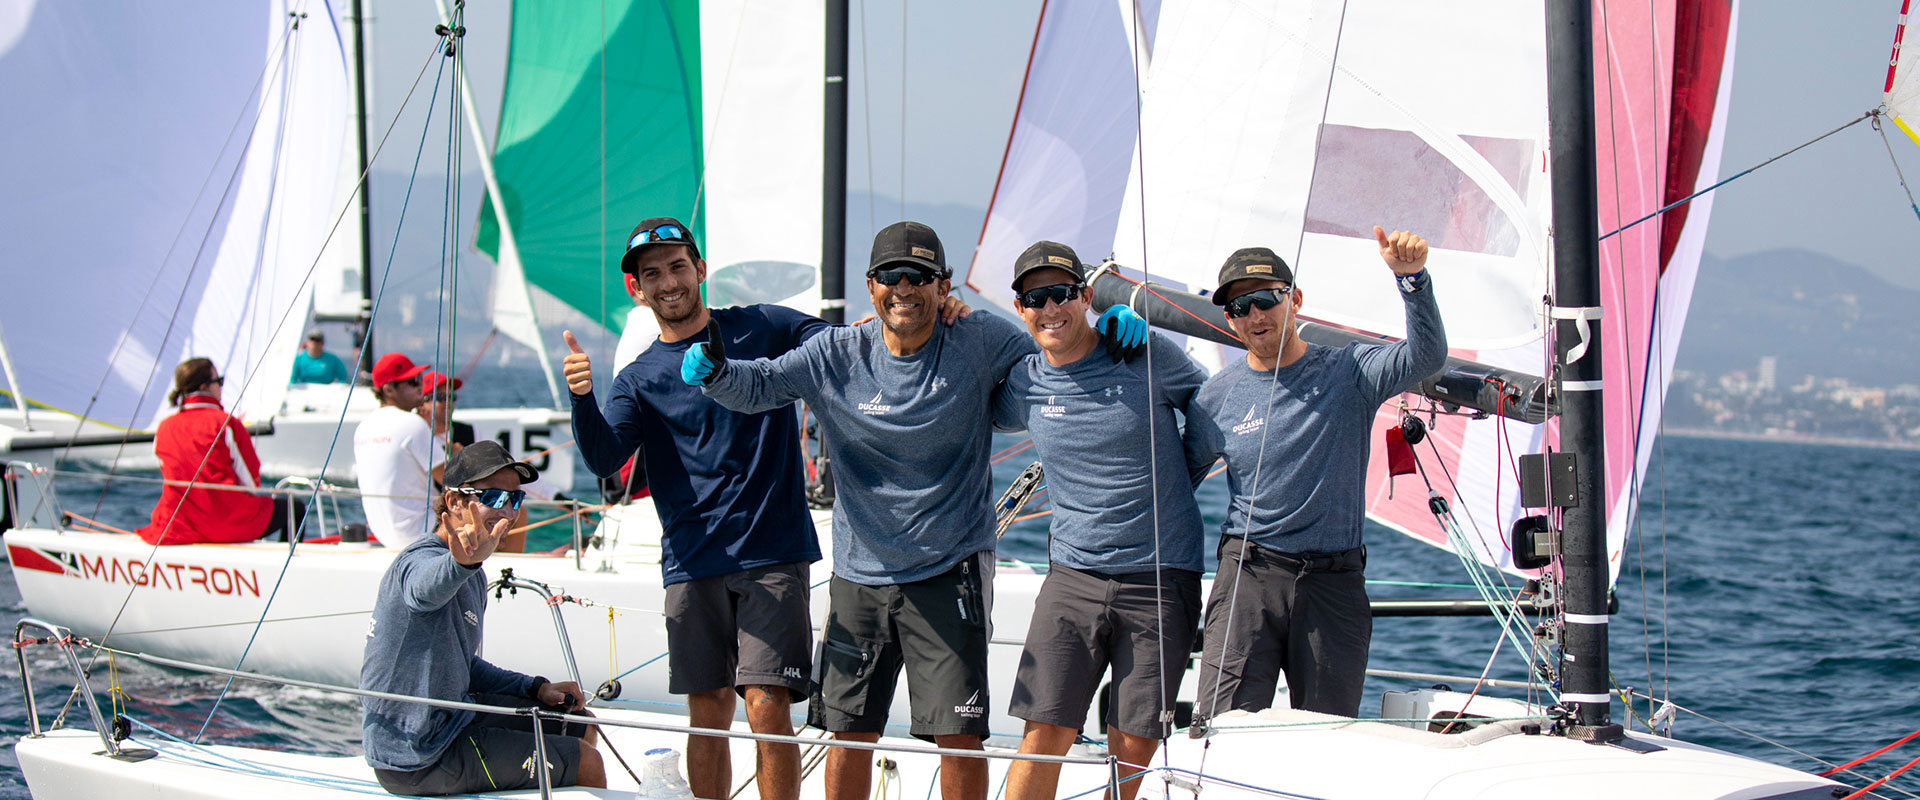 The Ducasse Sailing Team of Santiago, Chile, triumphed in the Corinthian division.